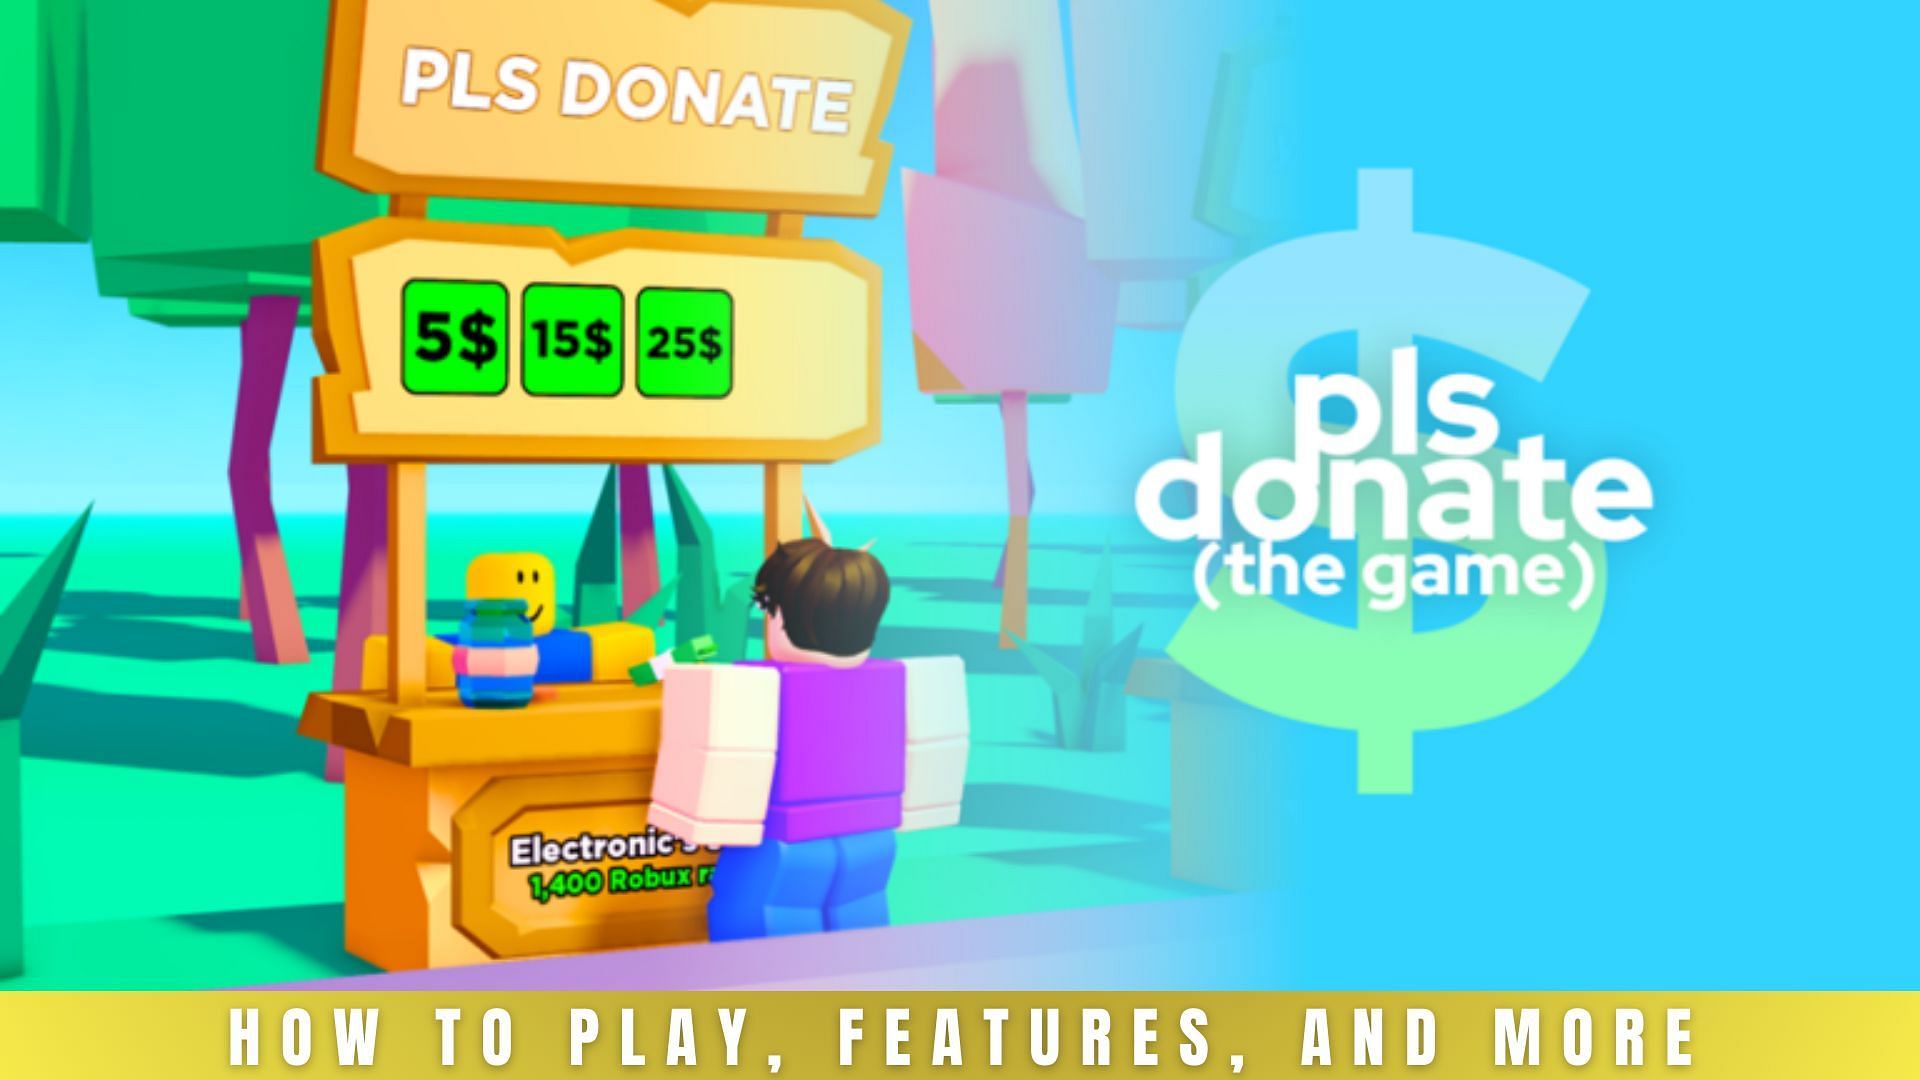 HOW TO ADD A GAME PASS TO PLS DONATE - How to set up donations in Pls Donate